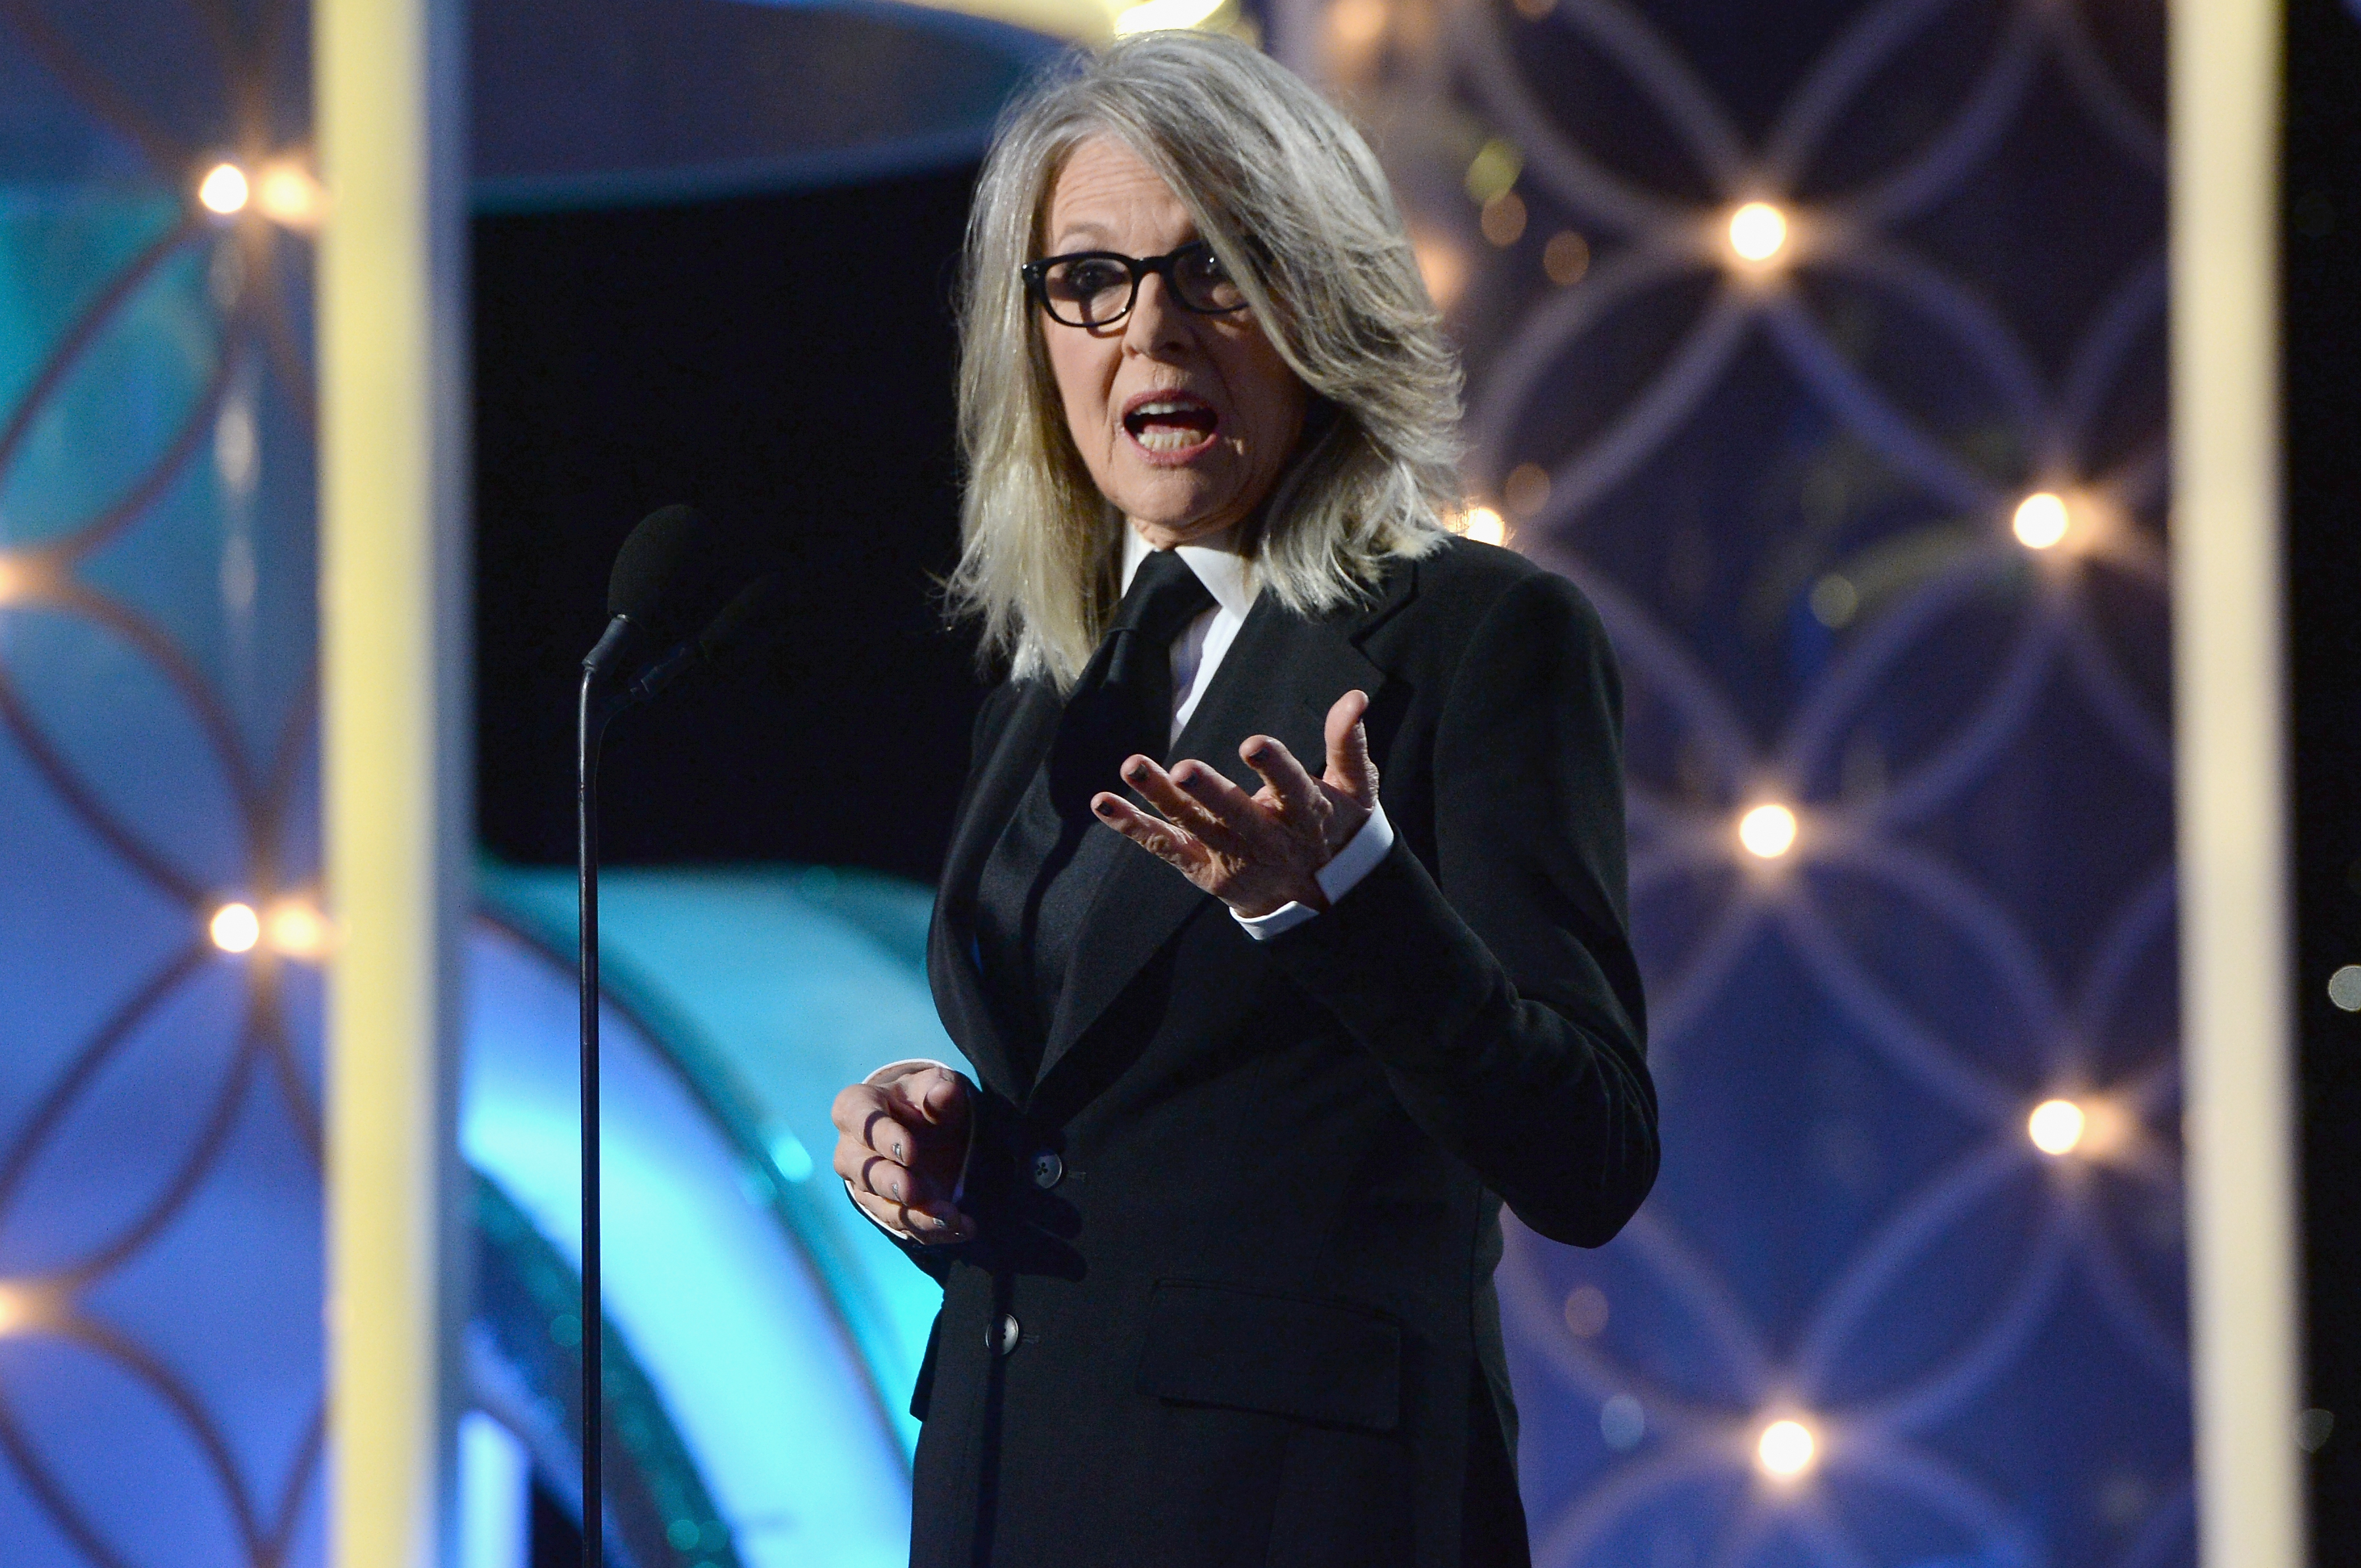 Diane Keaton at the 71st Annual Golden Globe Awards in Beverly Hills, 2014 | Source: Getty Images